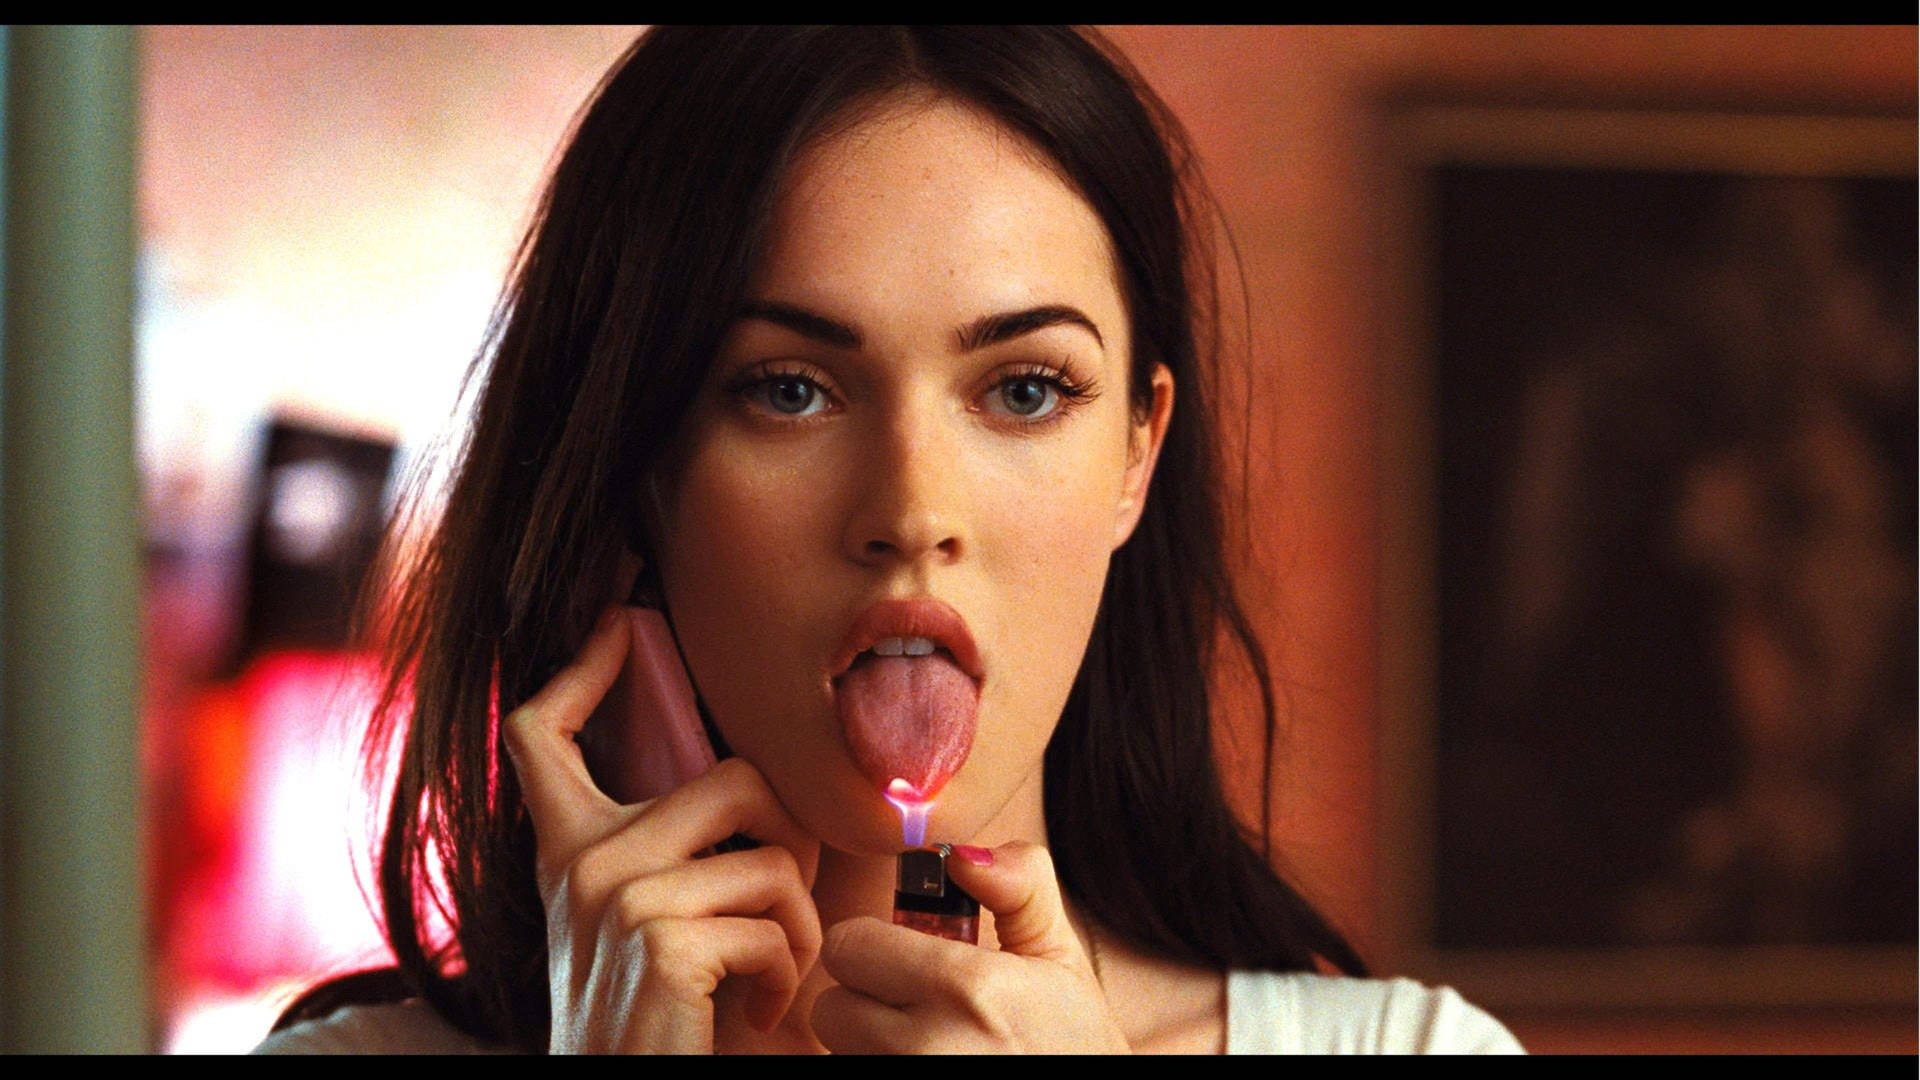 Megan Fox Sticks Out Her Tongue In A Sultry Pose. Background